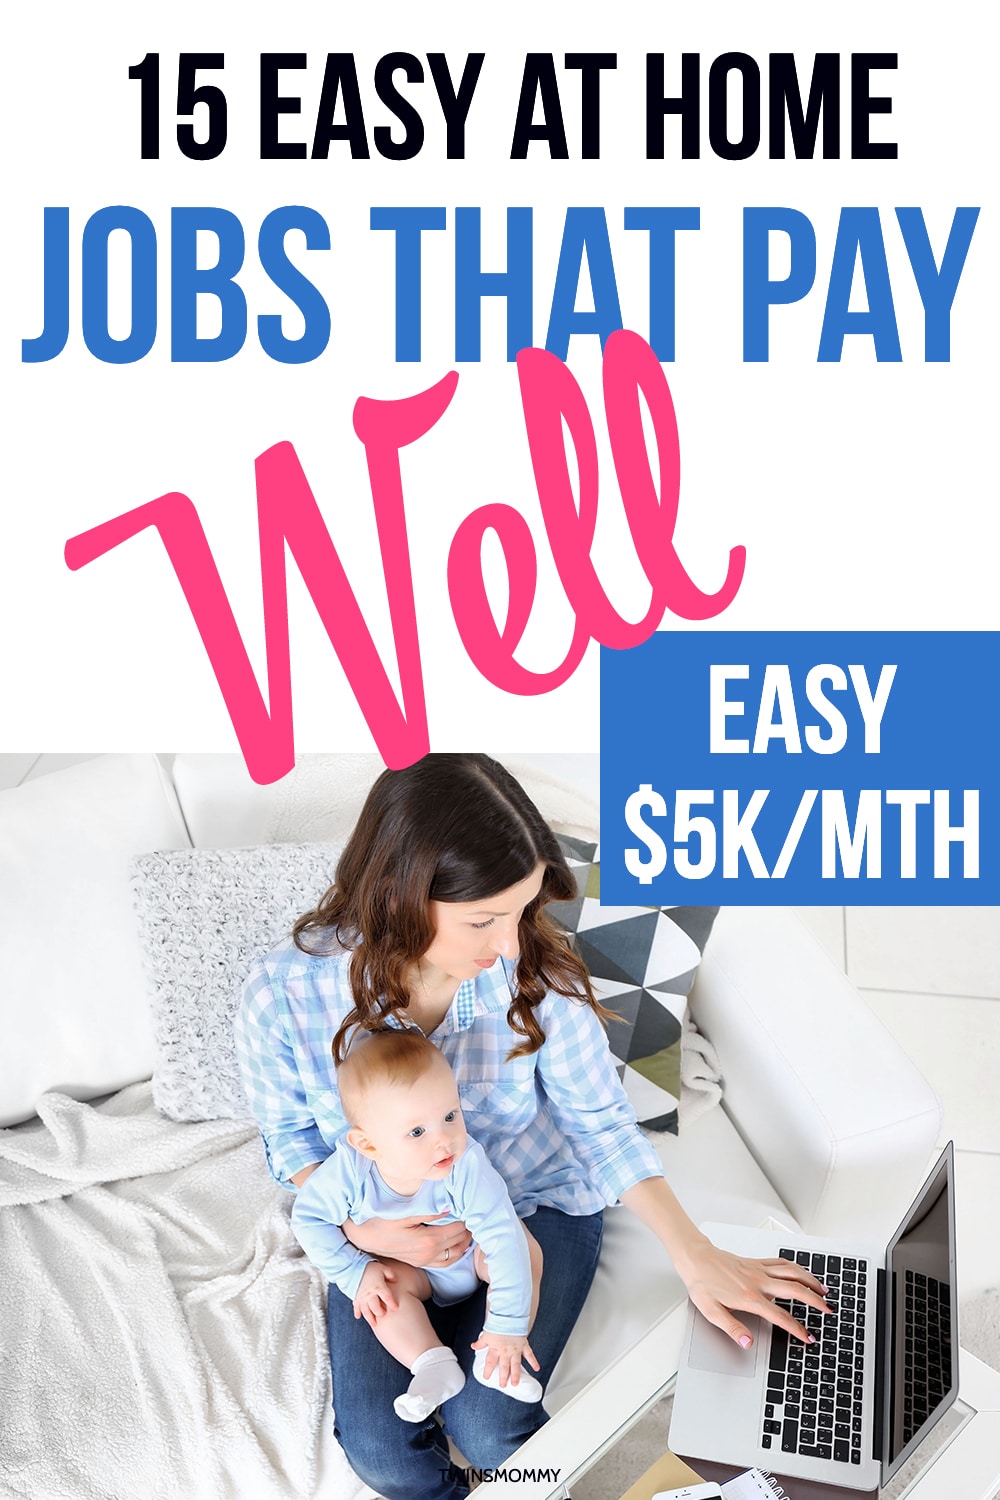 15 Easy Jobs That Pay Well For Moms Hourly Rates For 2020